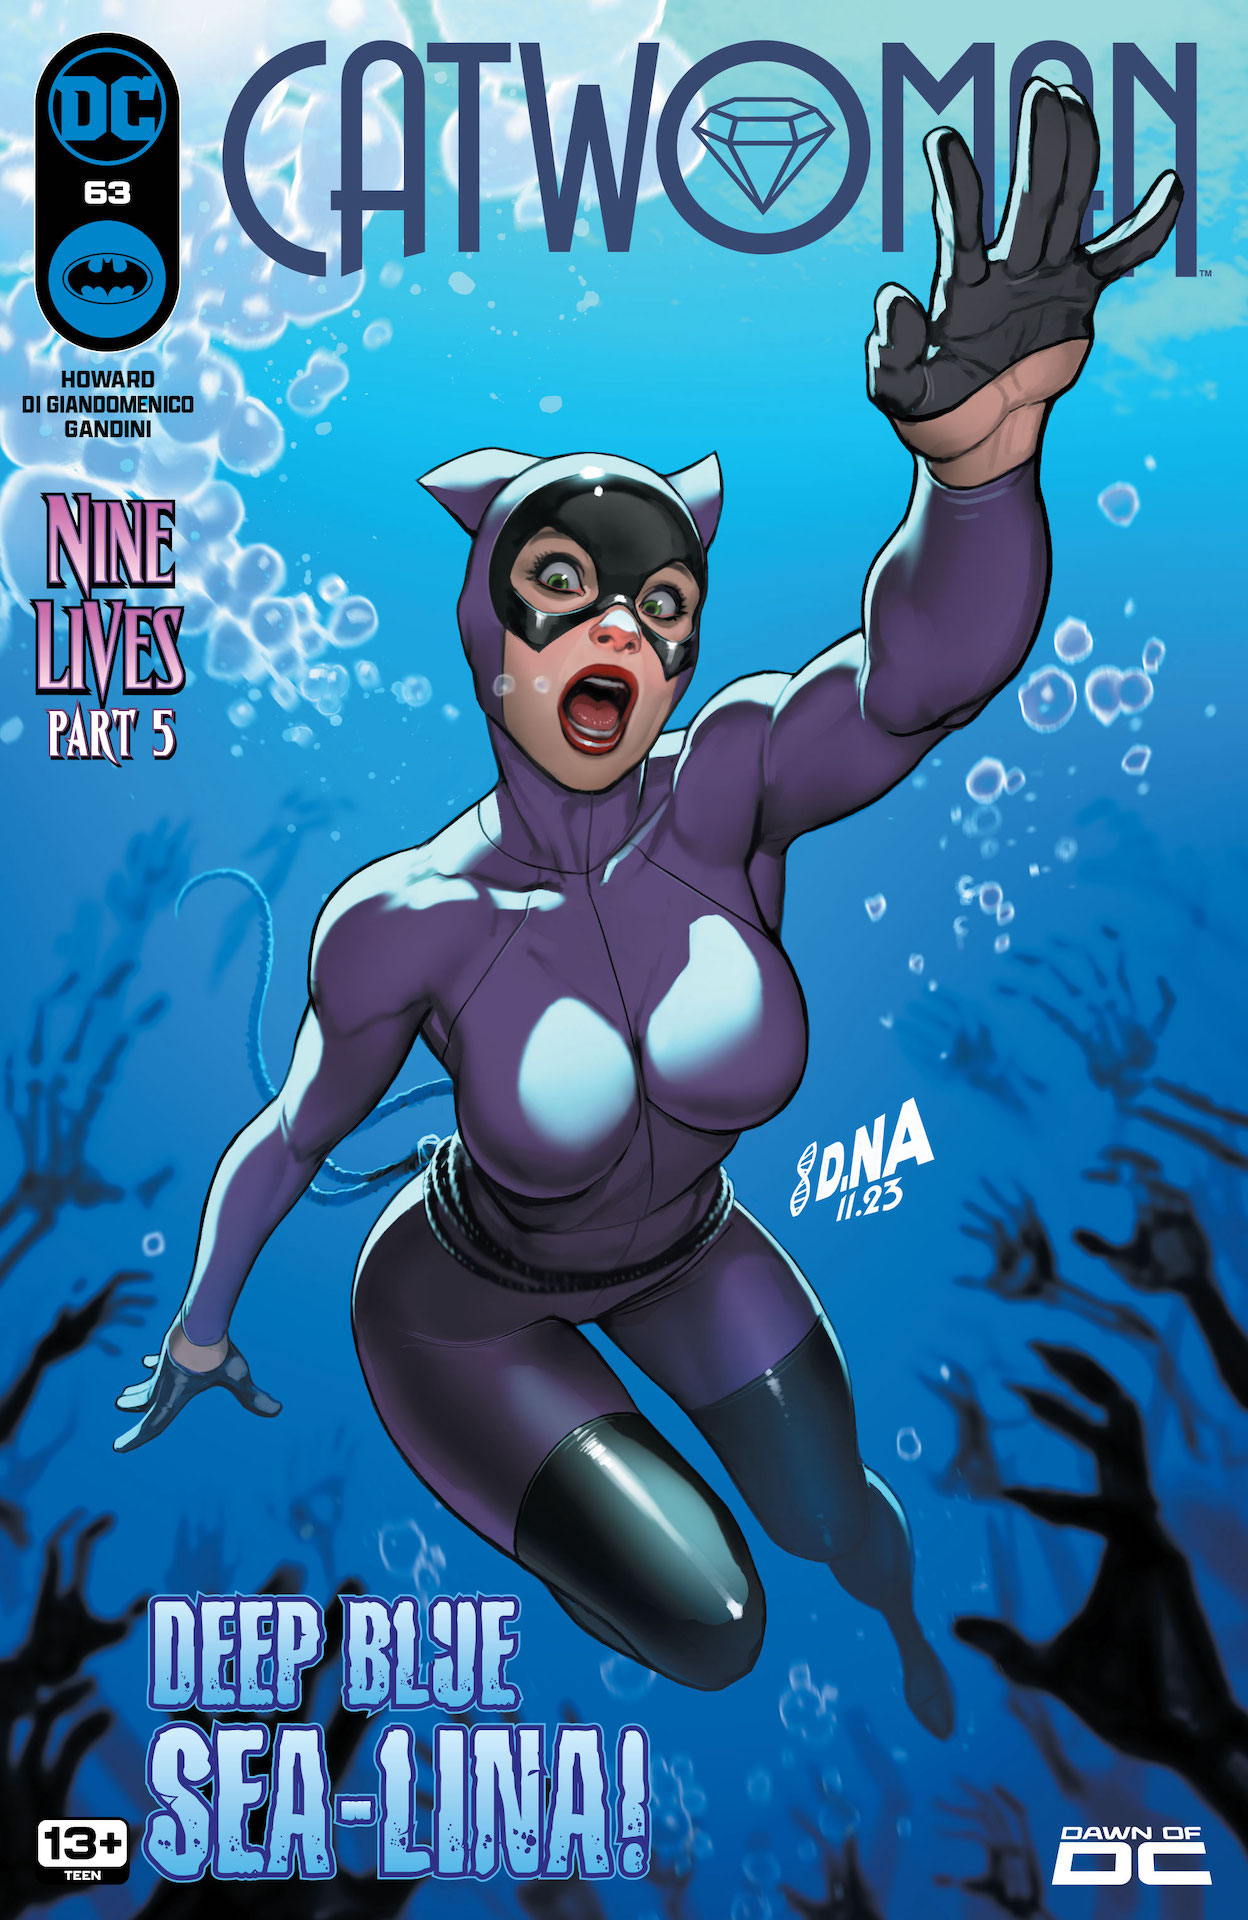 DC Preview: Catwoman #63